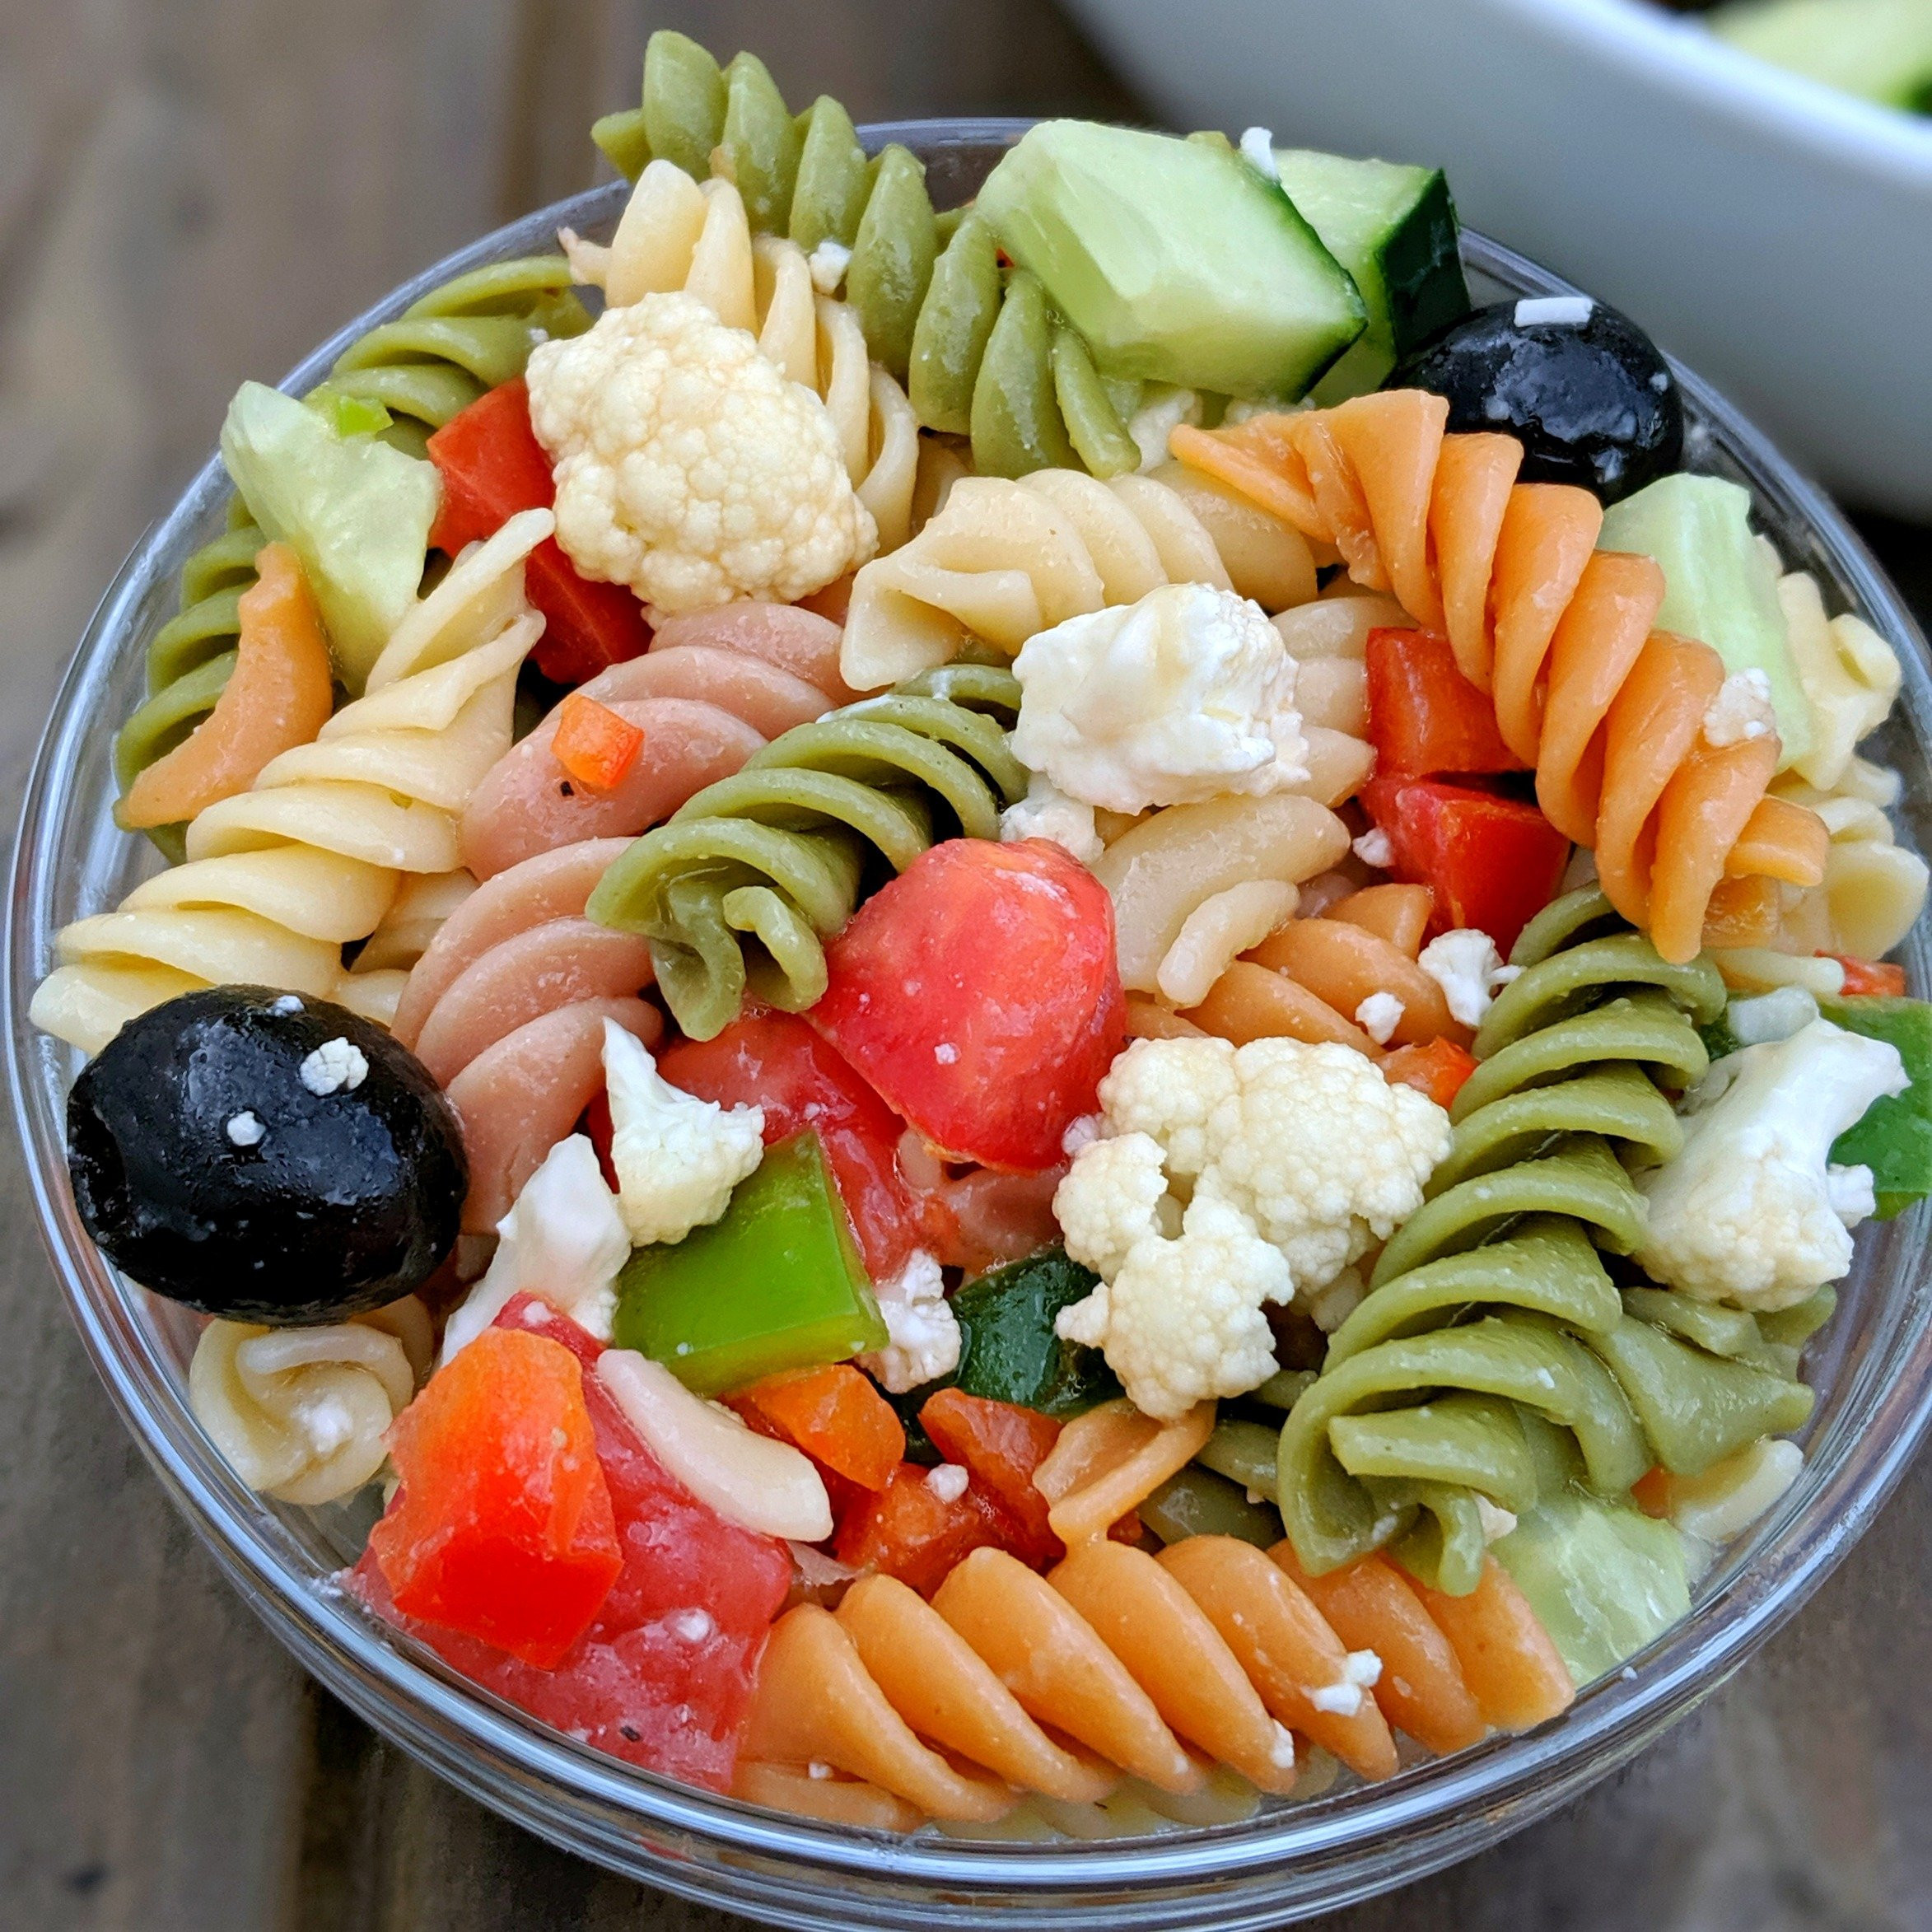 15 Of the Best Ideas for Low Calorie Pasta Salad